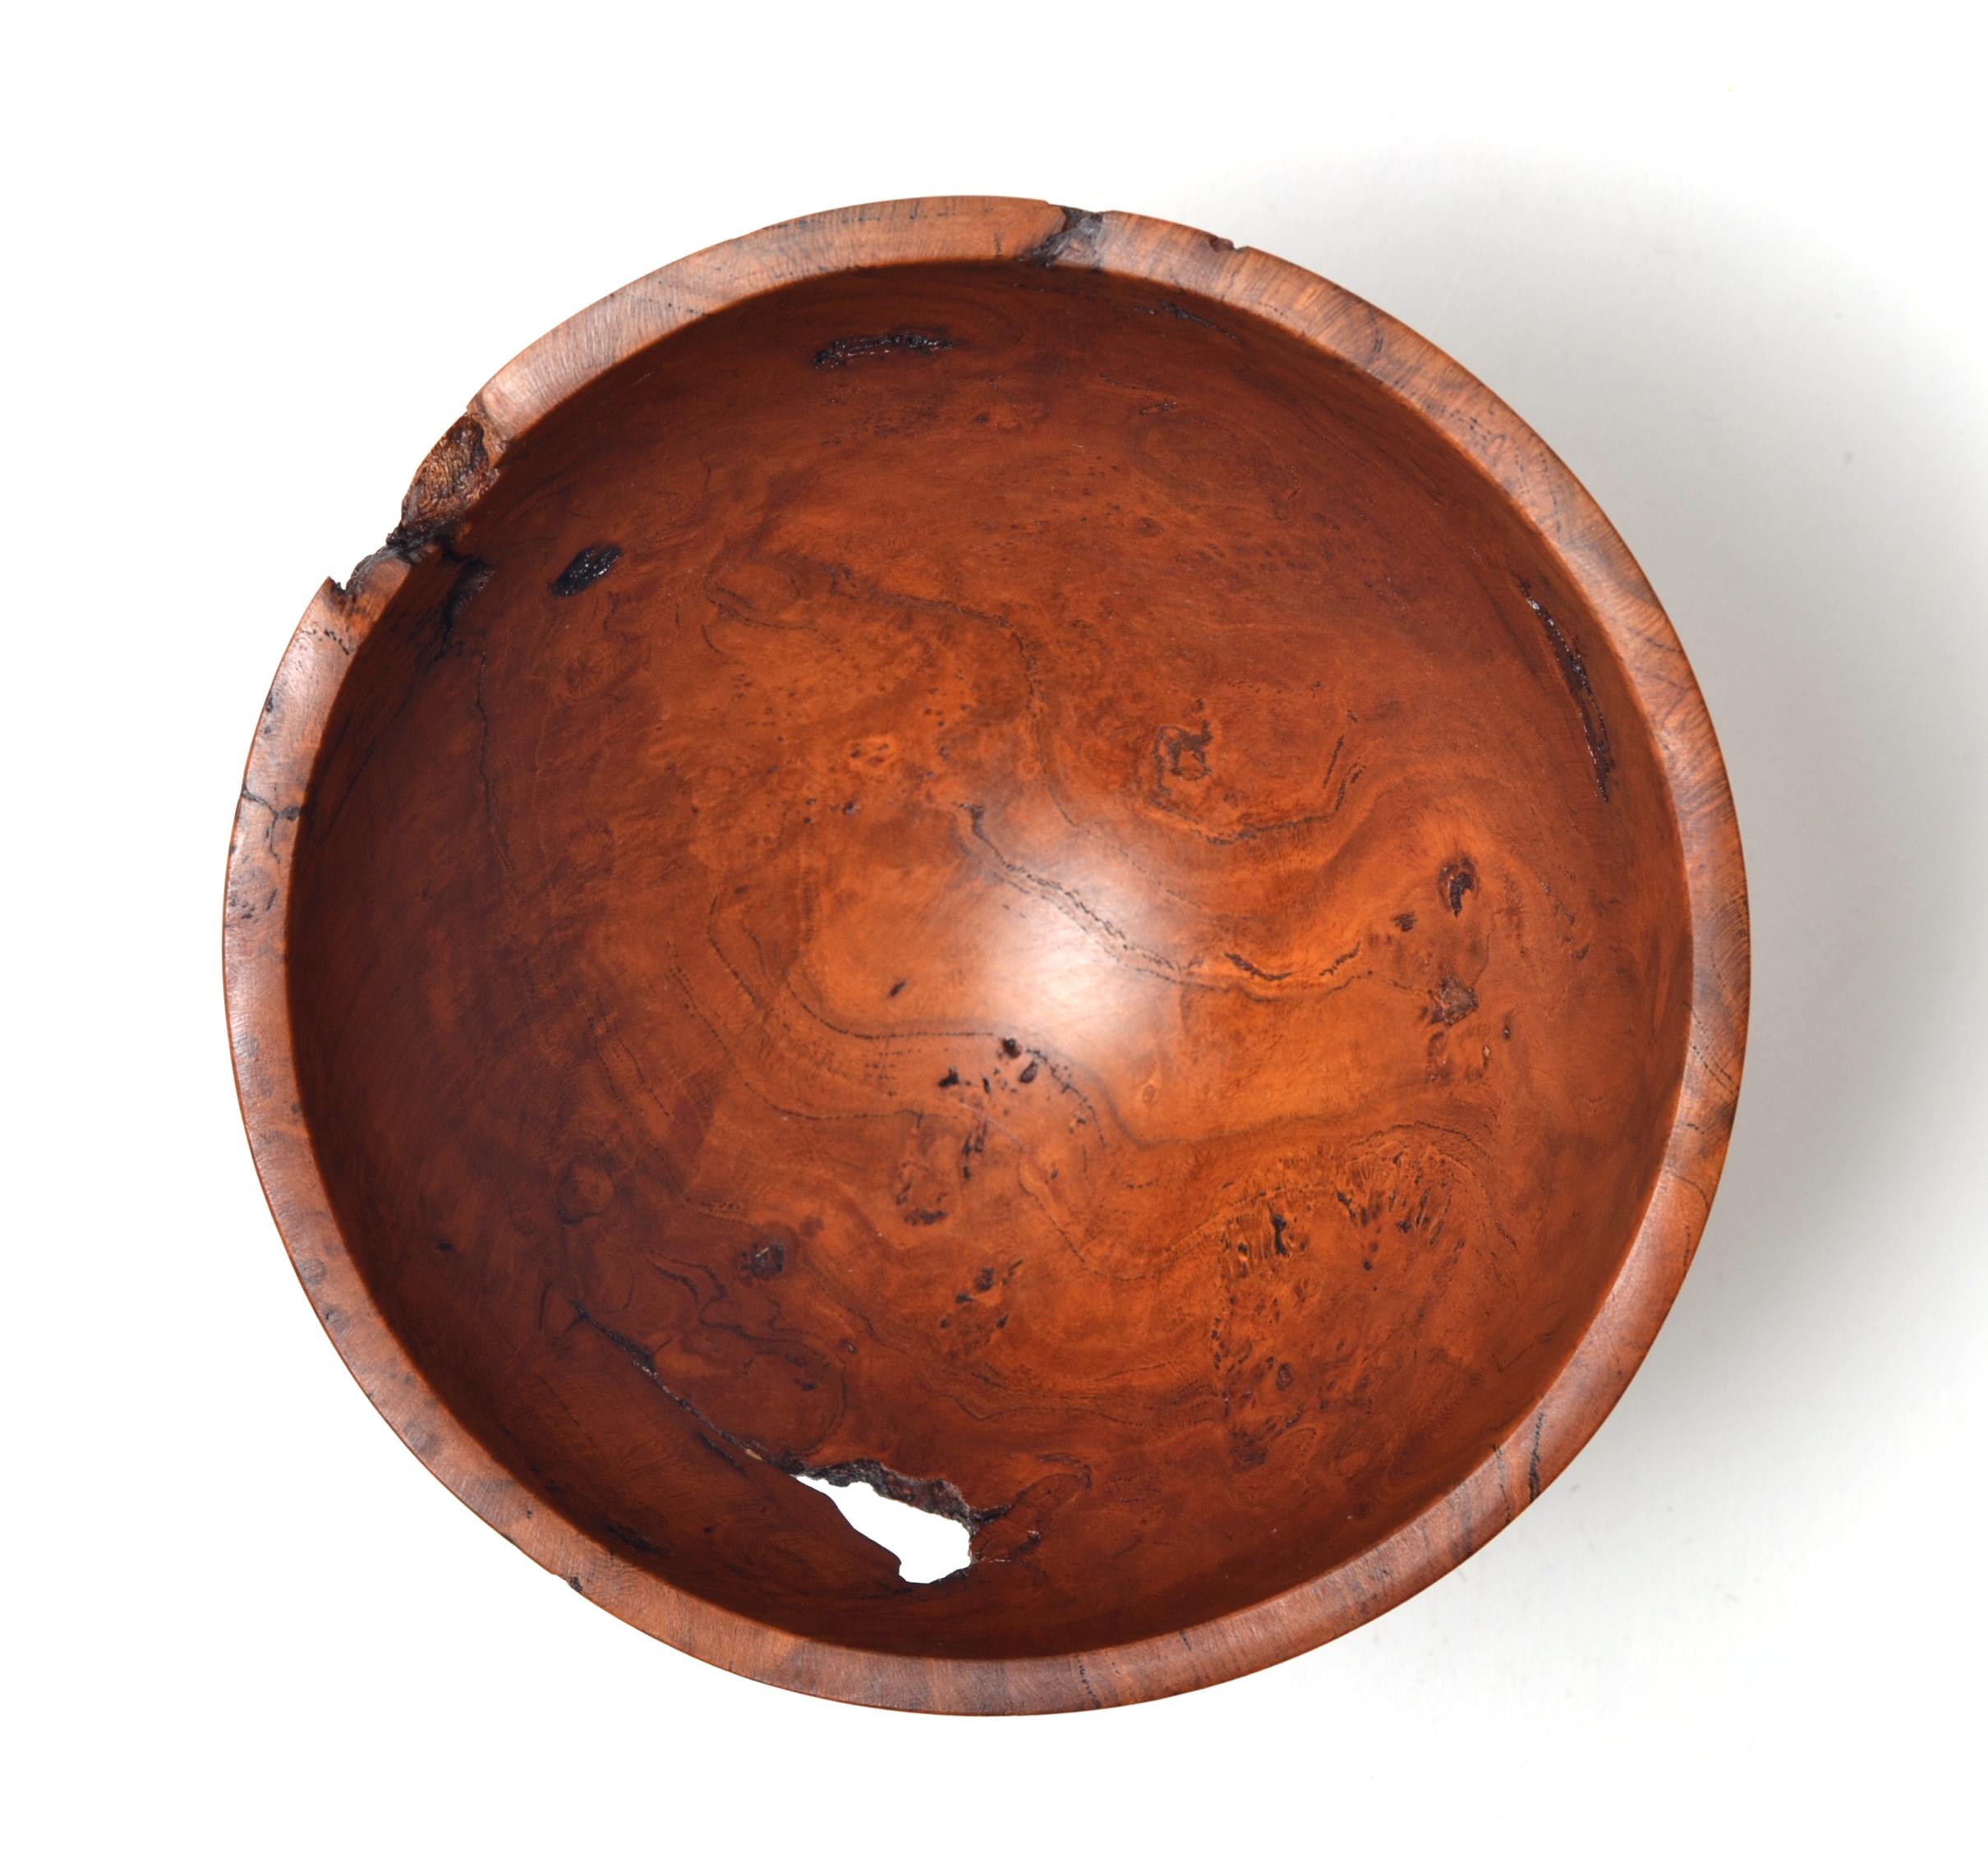 Contemporary Decorative Wooden Bowl by Dustin Coates For Sale